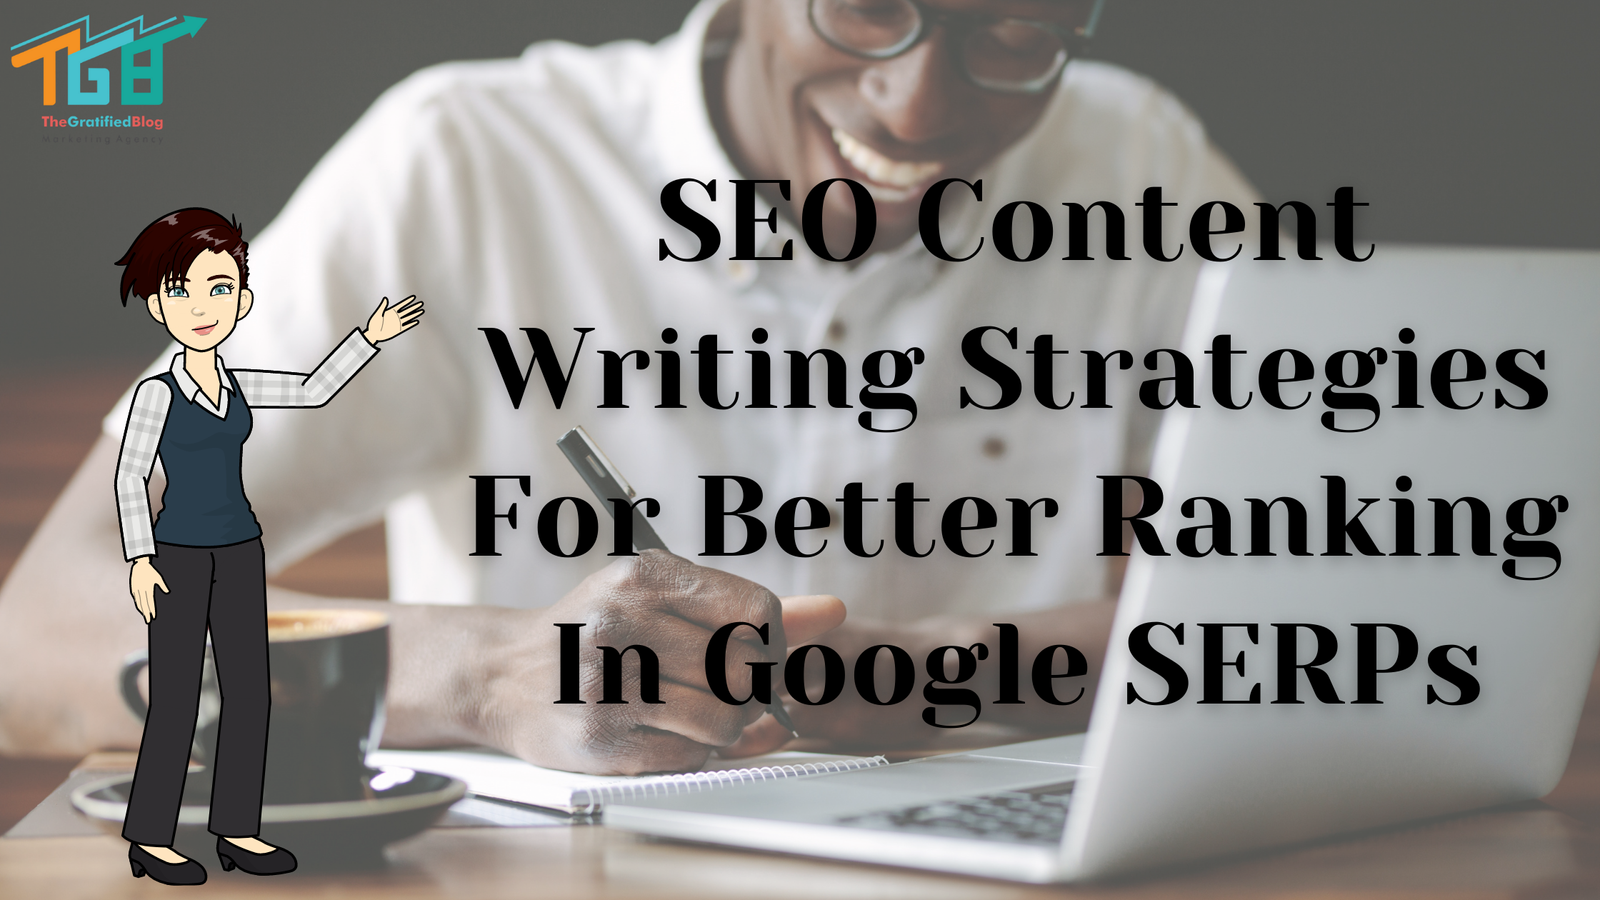 5 SEO Content Writing Strategies For Better Ranking In Google SERPs